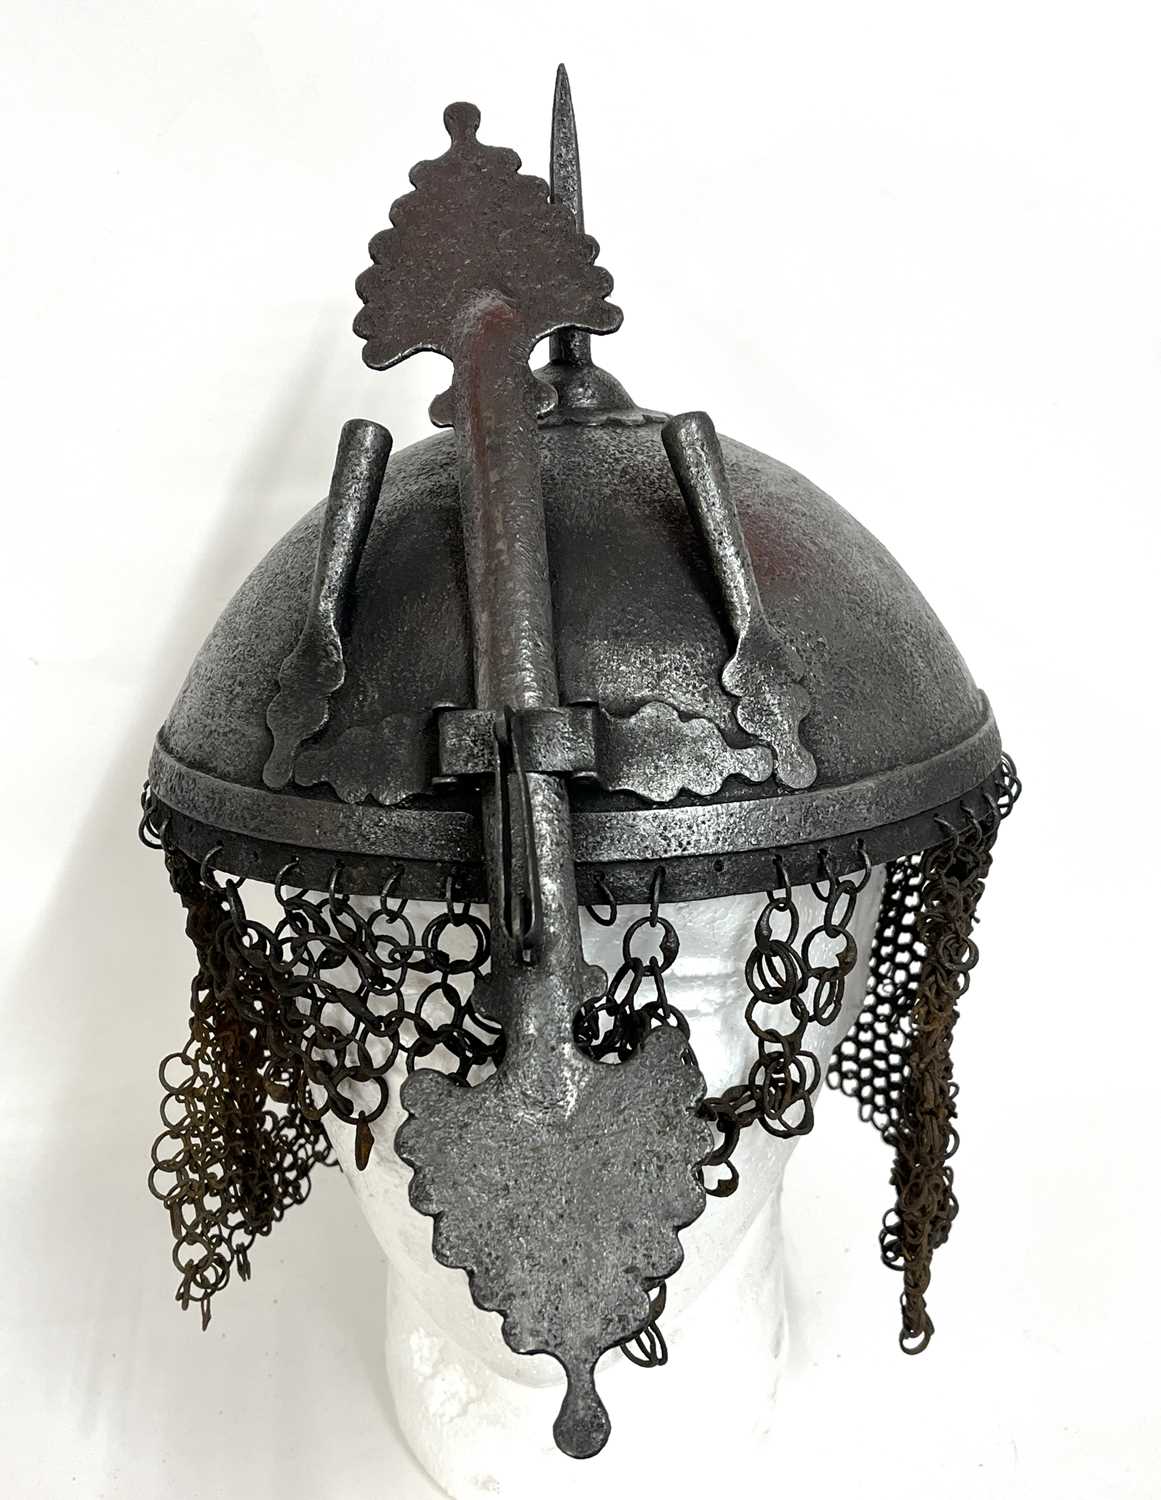 Late 19th Century Indo-Persian Kula - Khud helmet with a sliding nasal bar, twin plume sockets and - Image 8 of 10